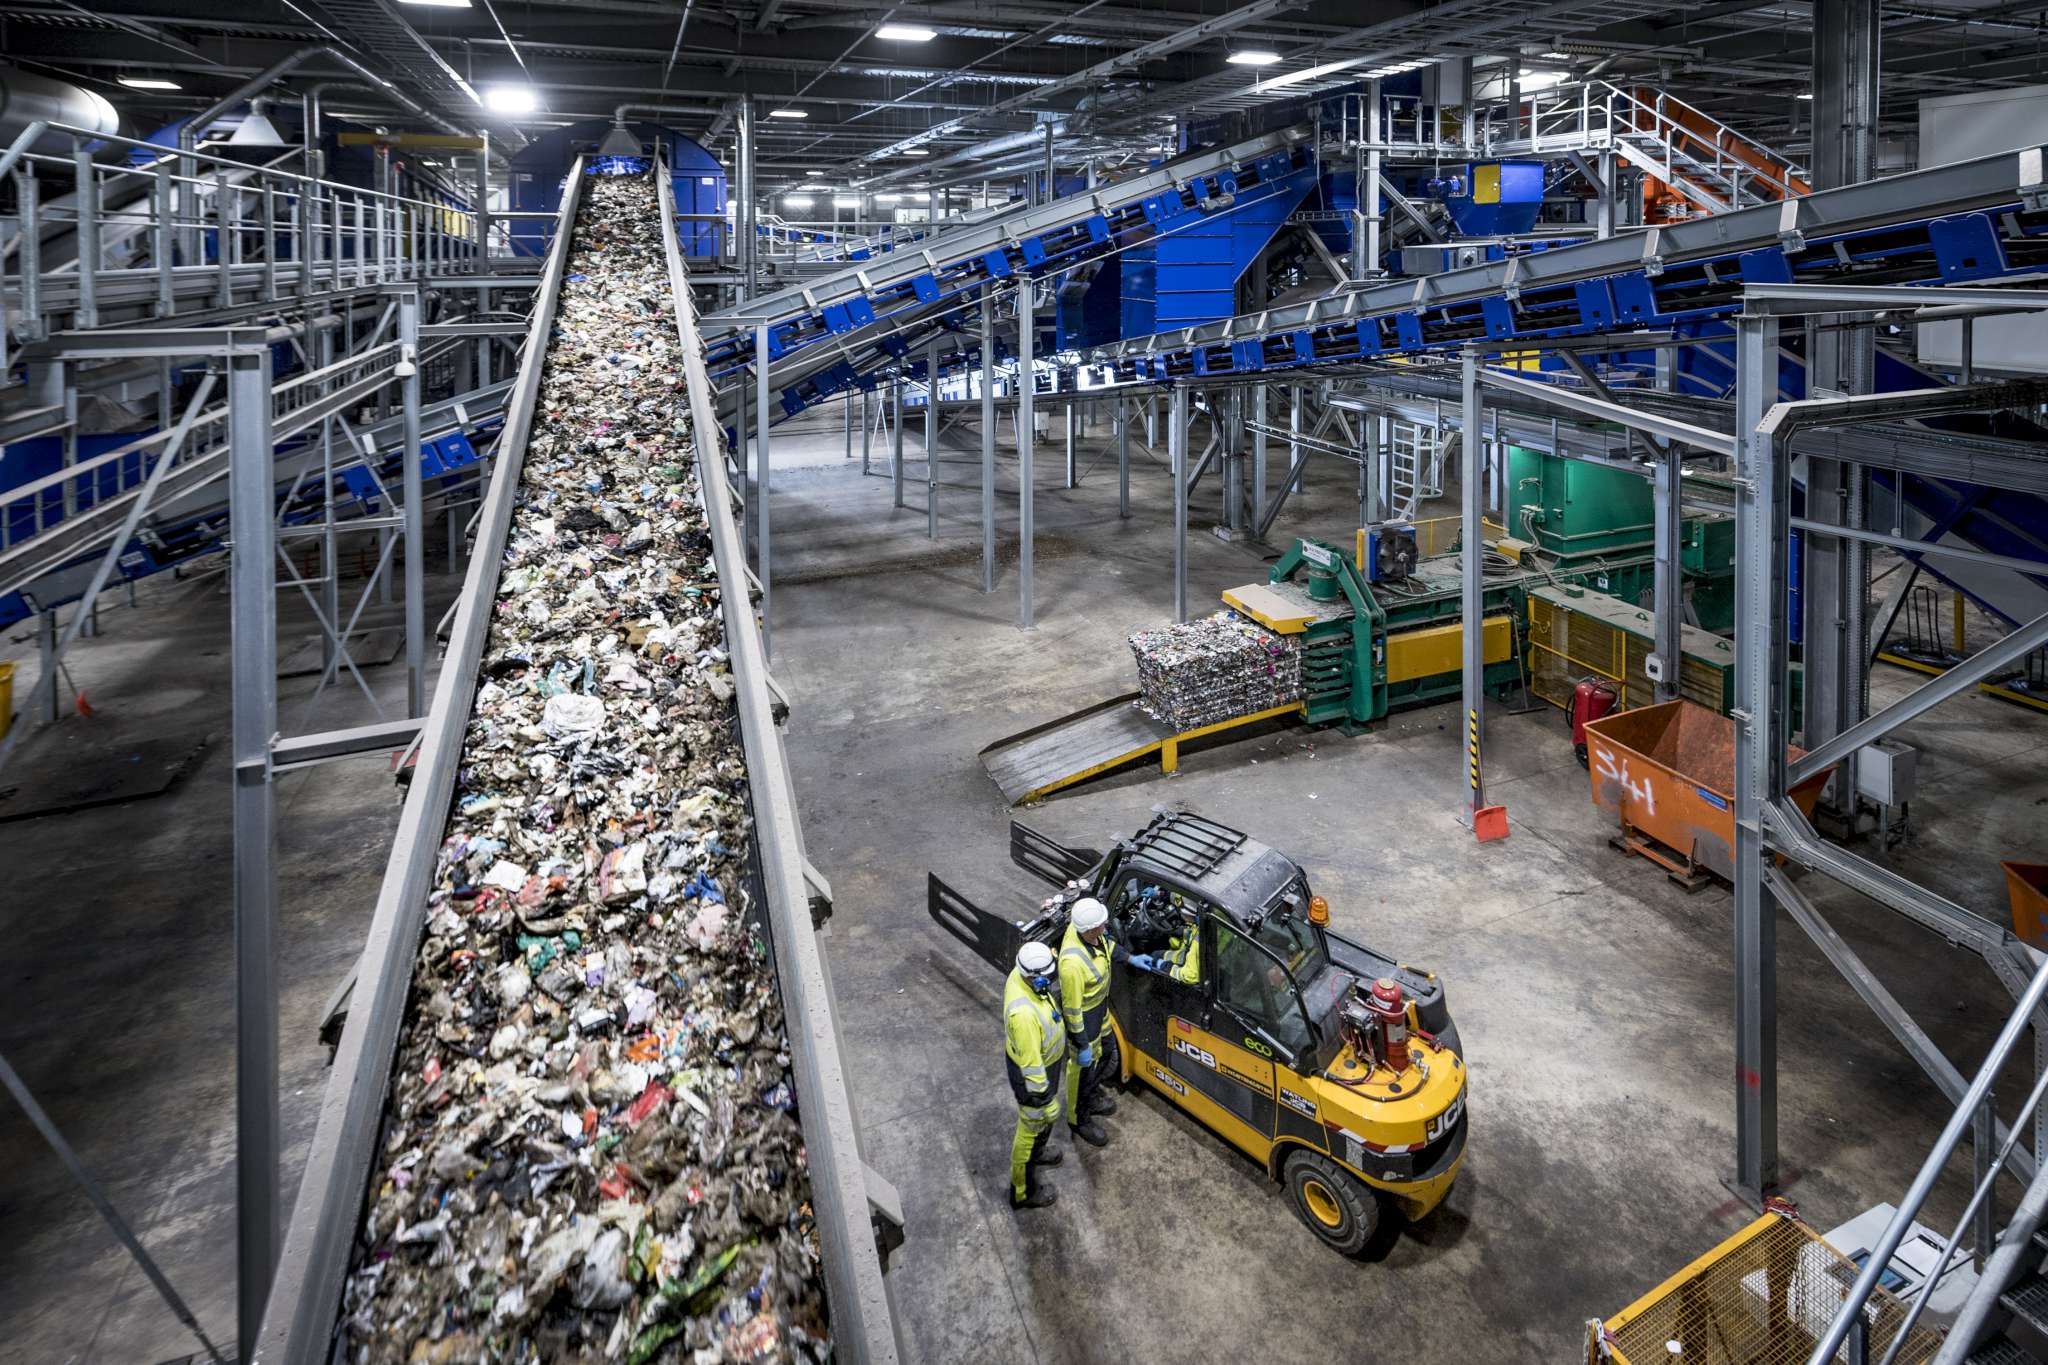 Rubbish on a conveyor belt inside Allerton Waste Recycling Centre